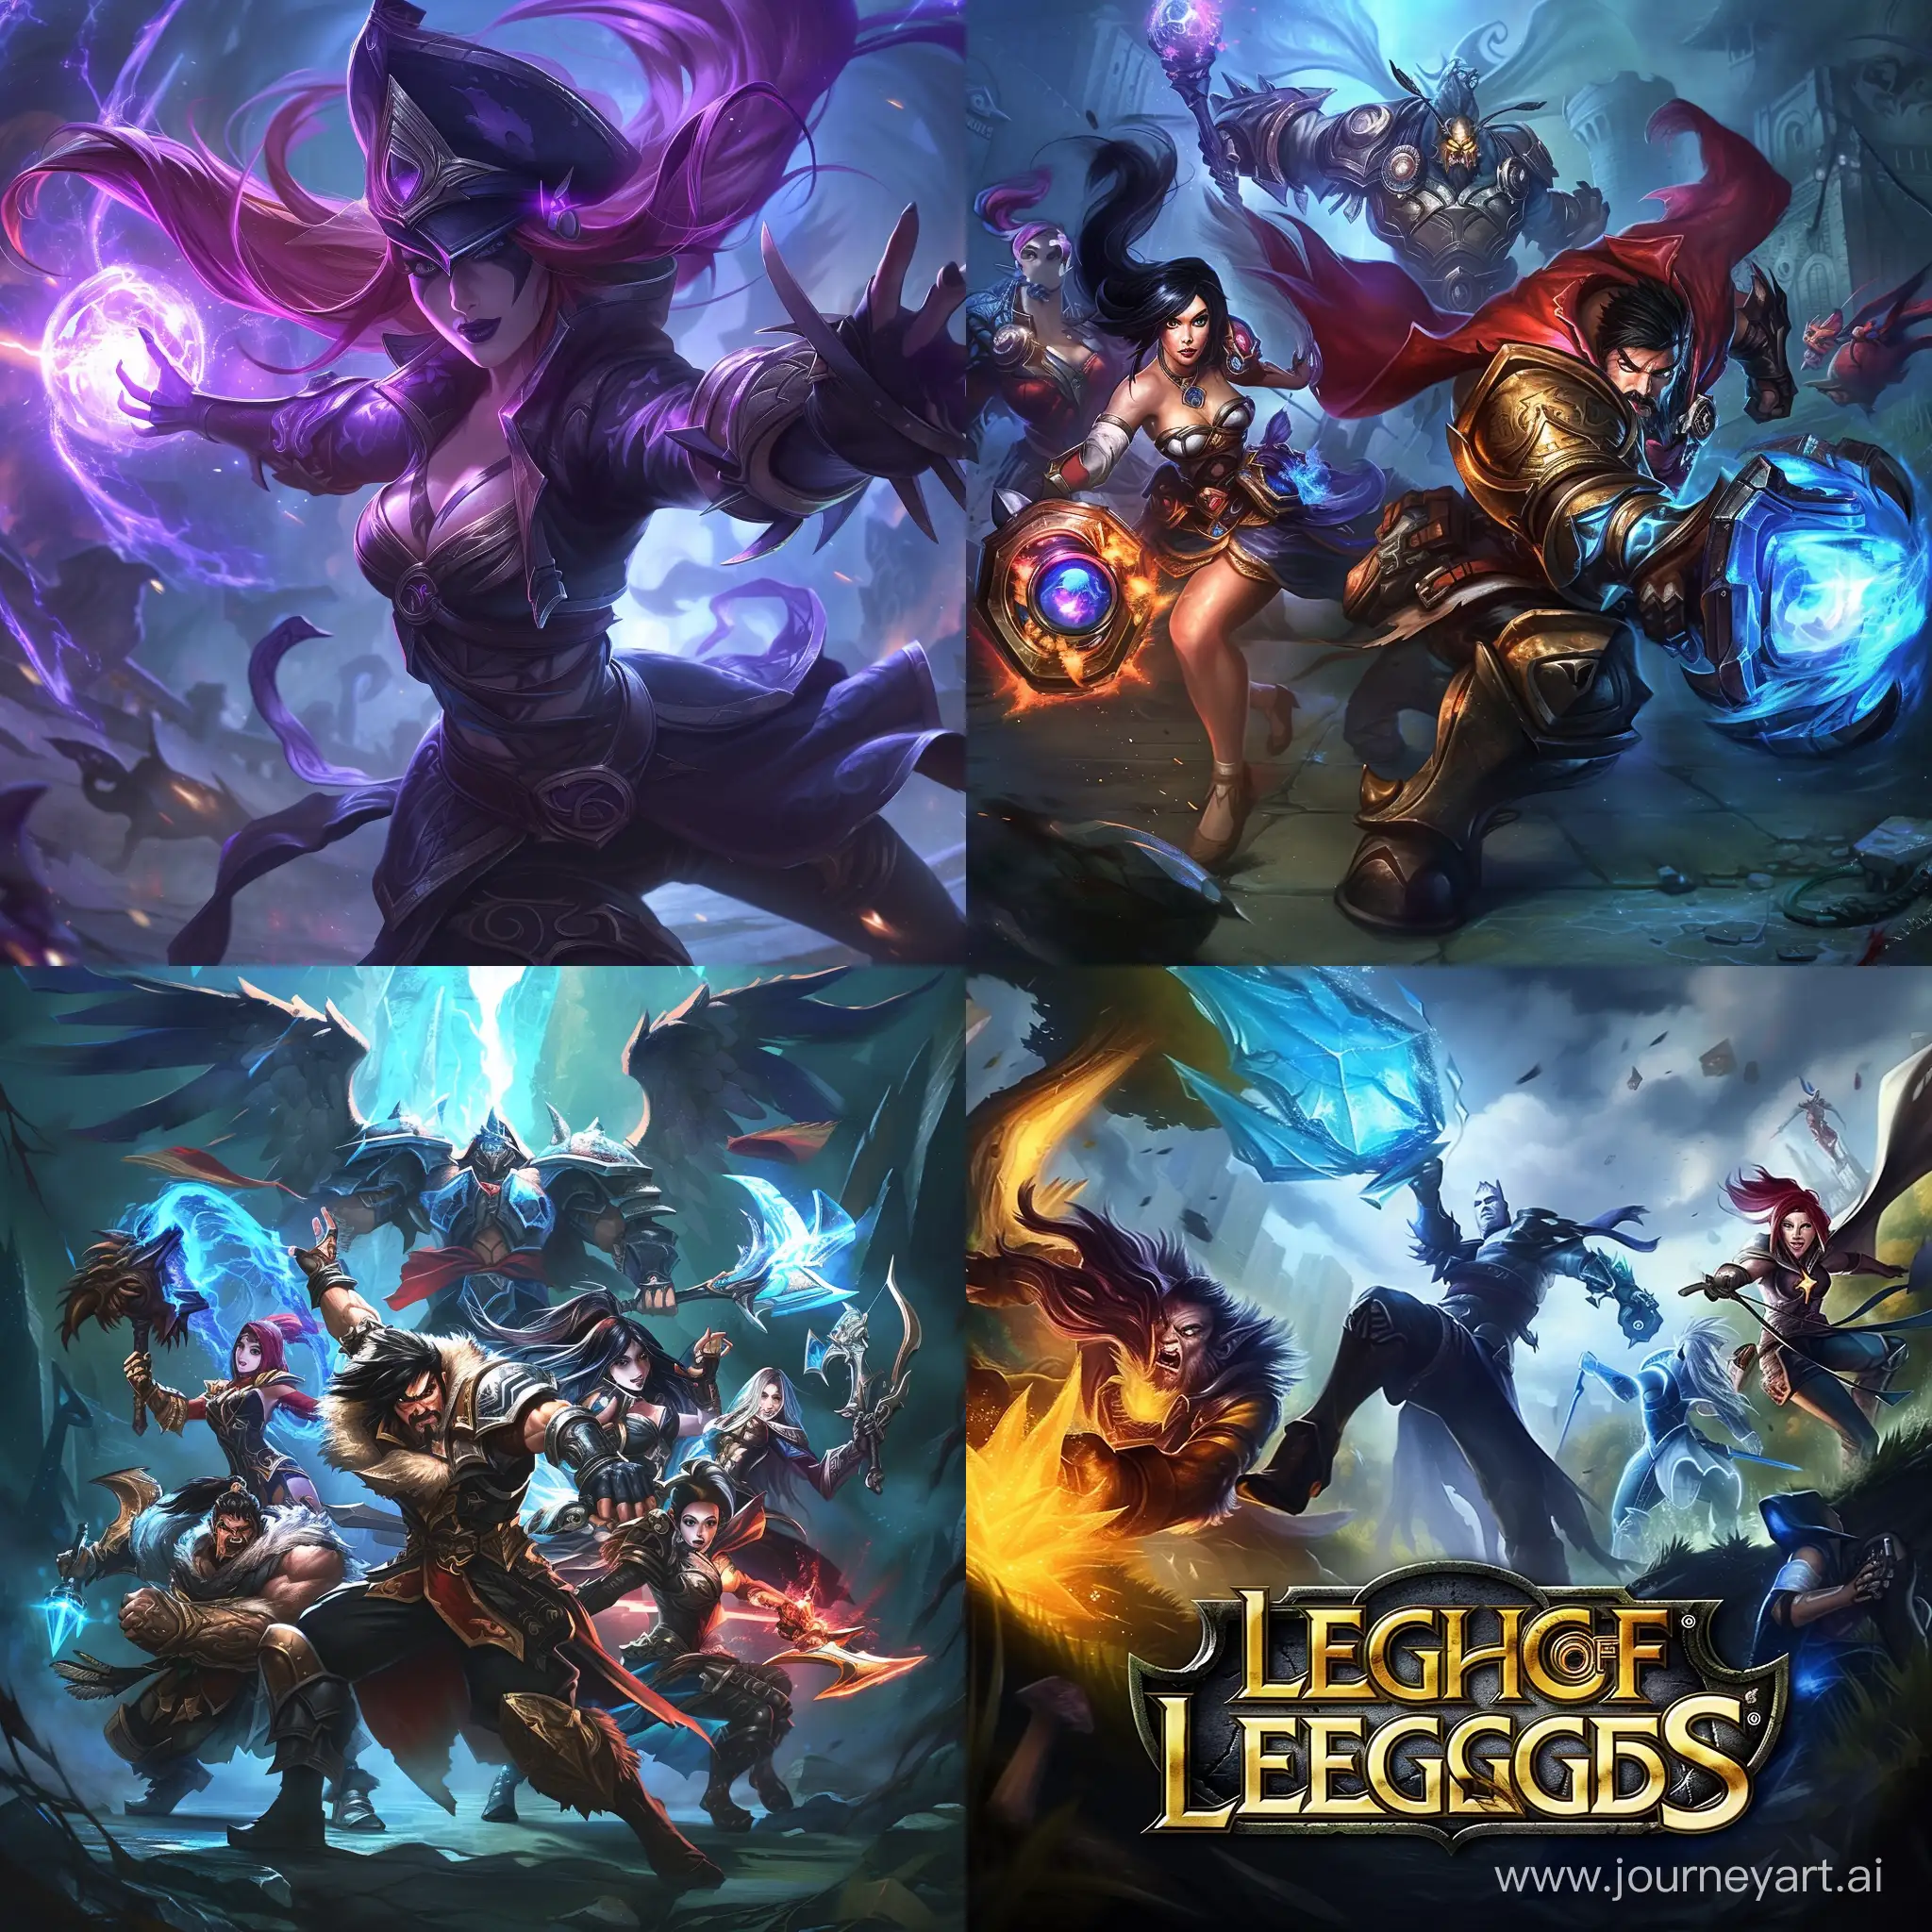 Epic-Battle-in-League-of-Legends-Arena